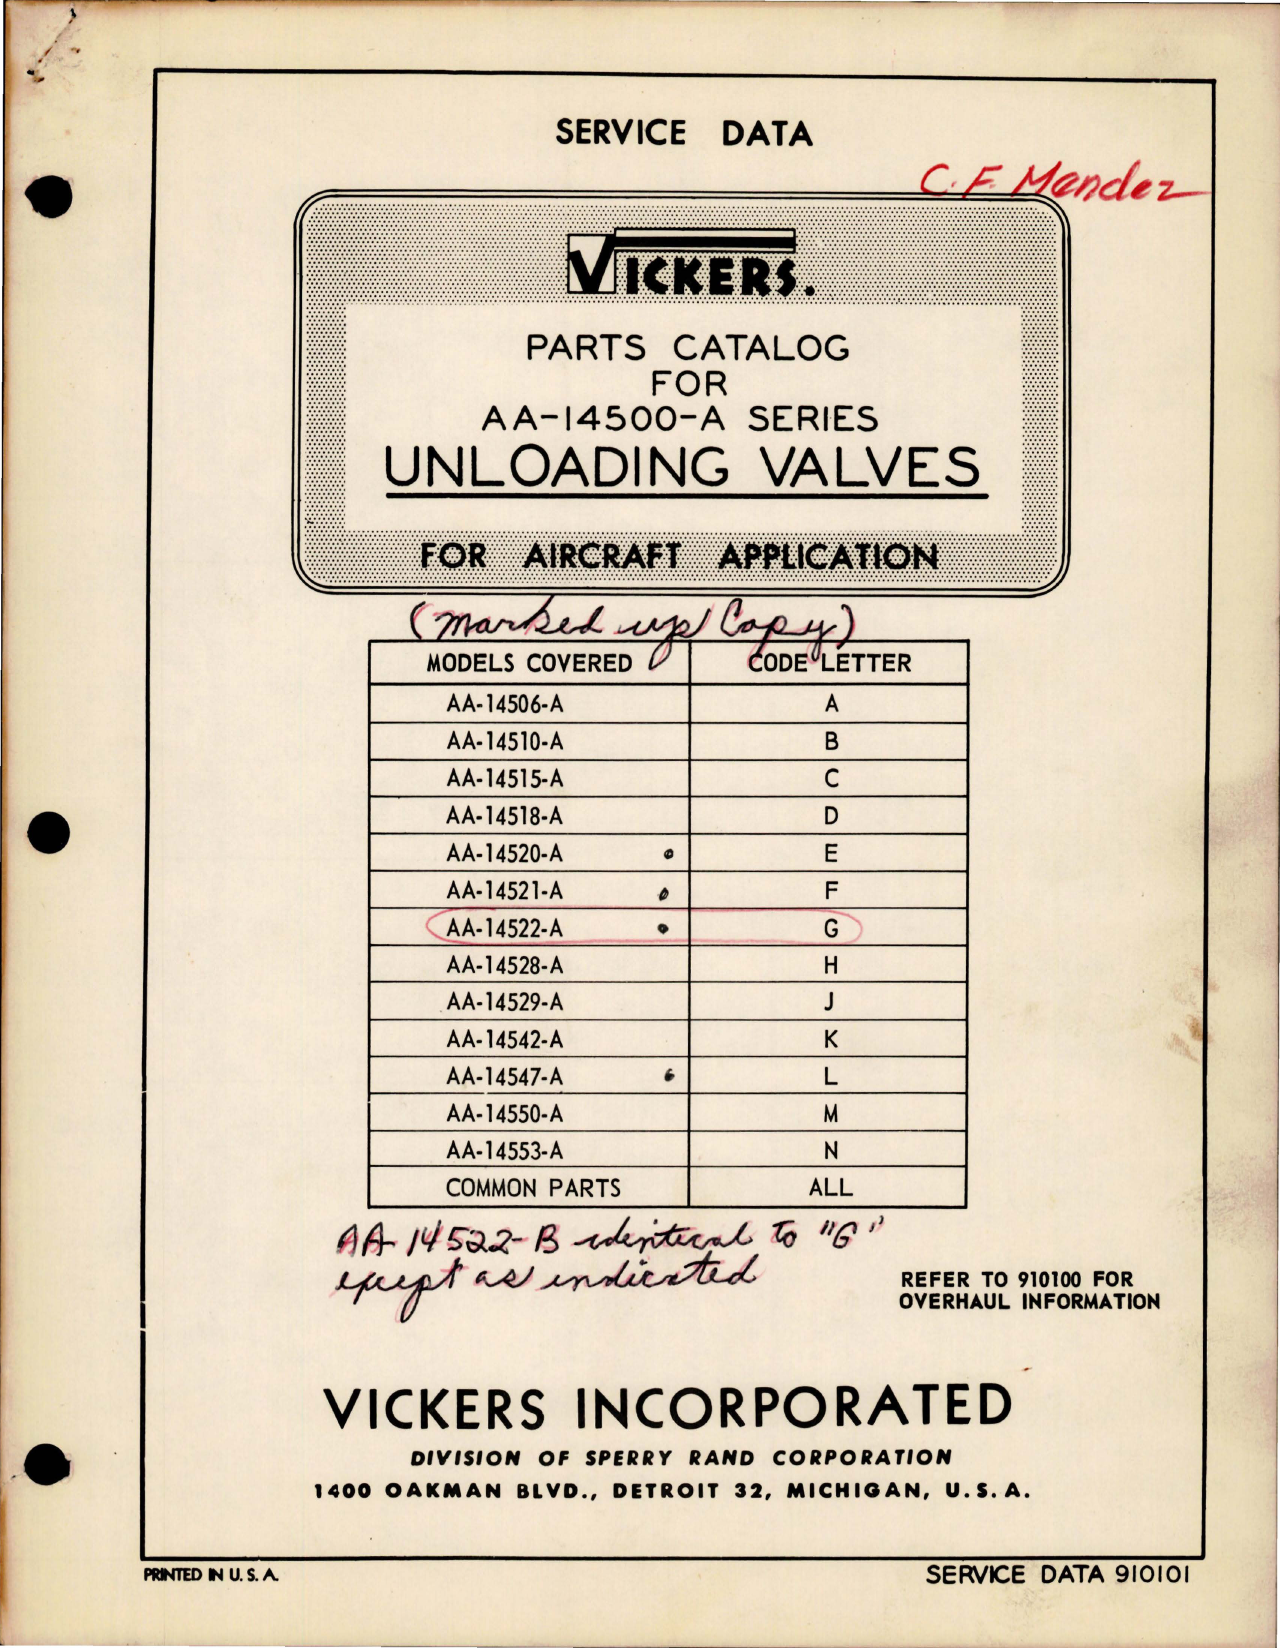 Sample page 1 from AirCorps Library document: Parts Catalog for Unloading Valves - AA-14500-A Series